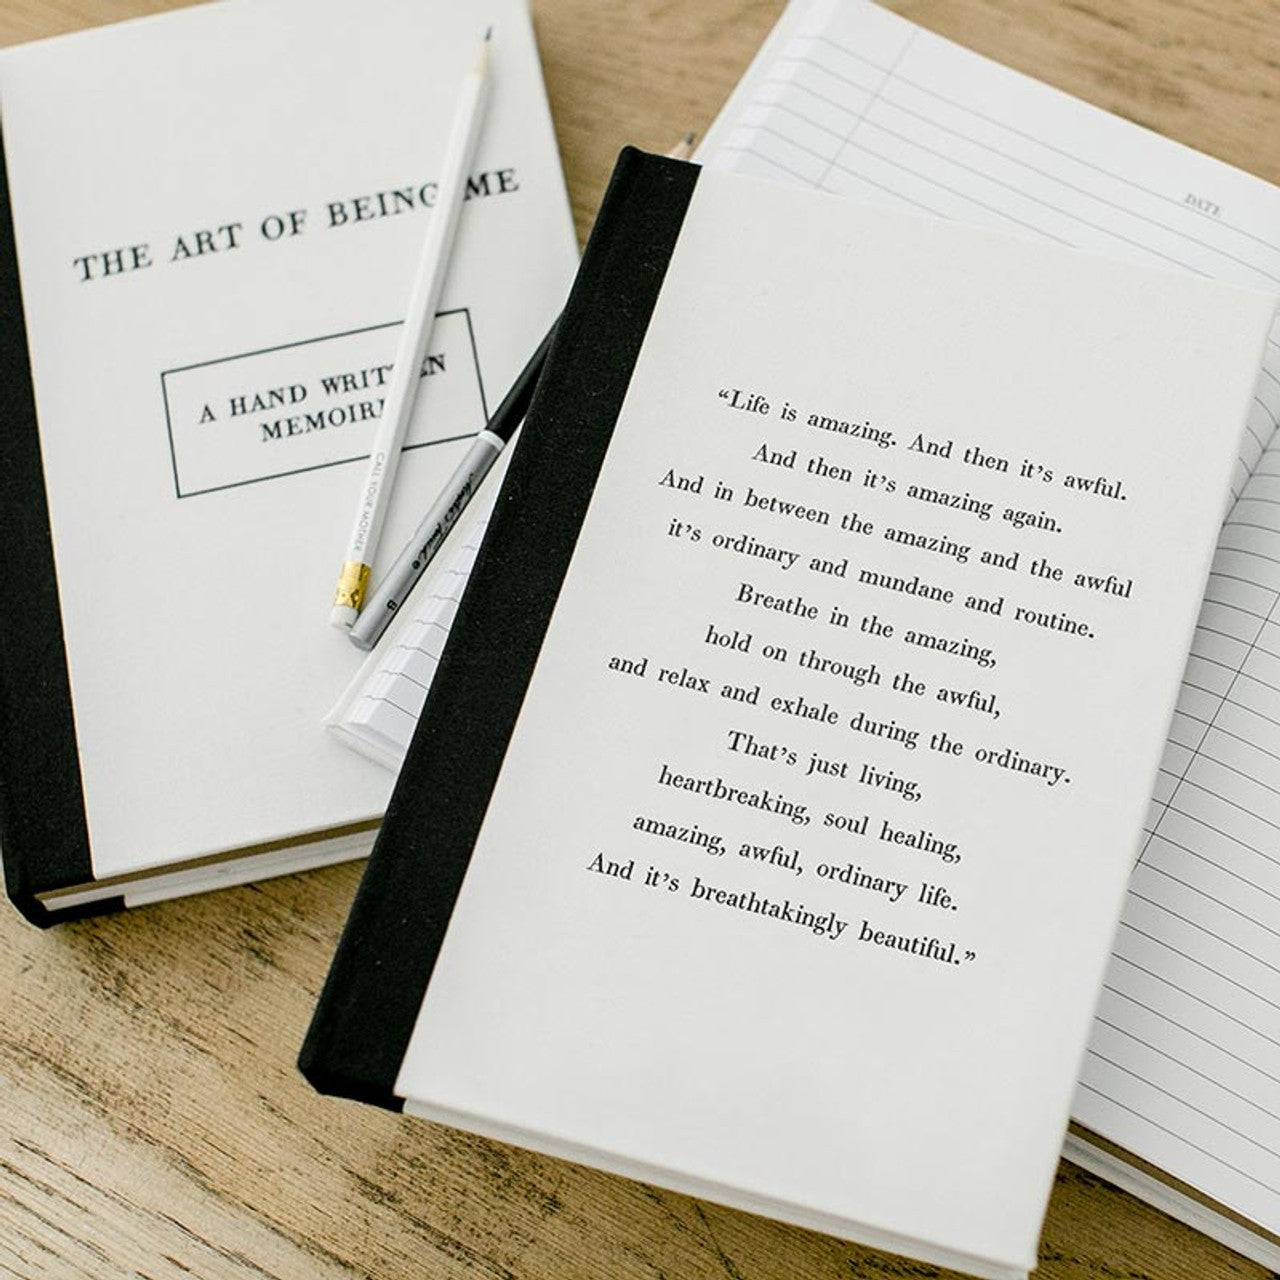 The Art of Being Me Journal | Linen Covered Combination Notebook and Sketchbook | 7" x 10" H